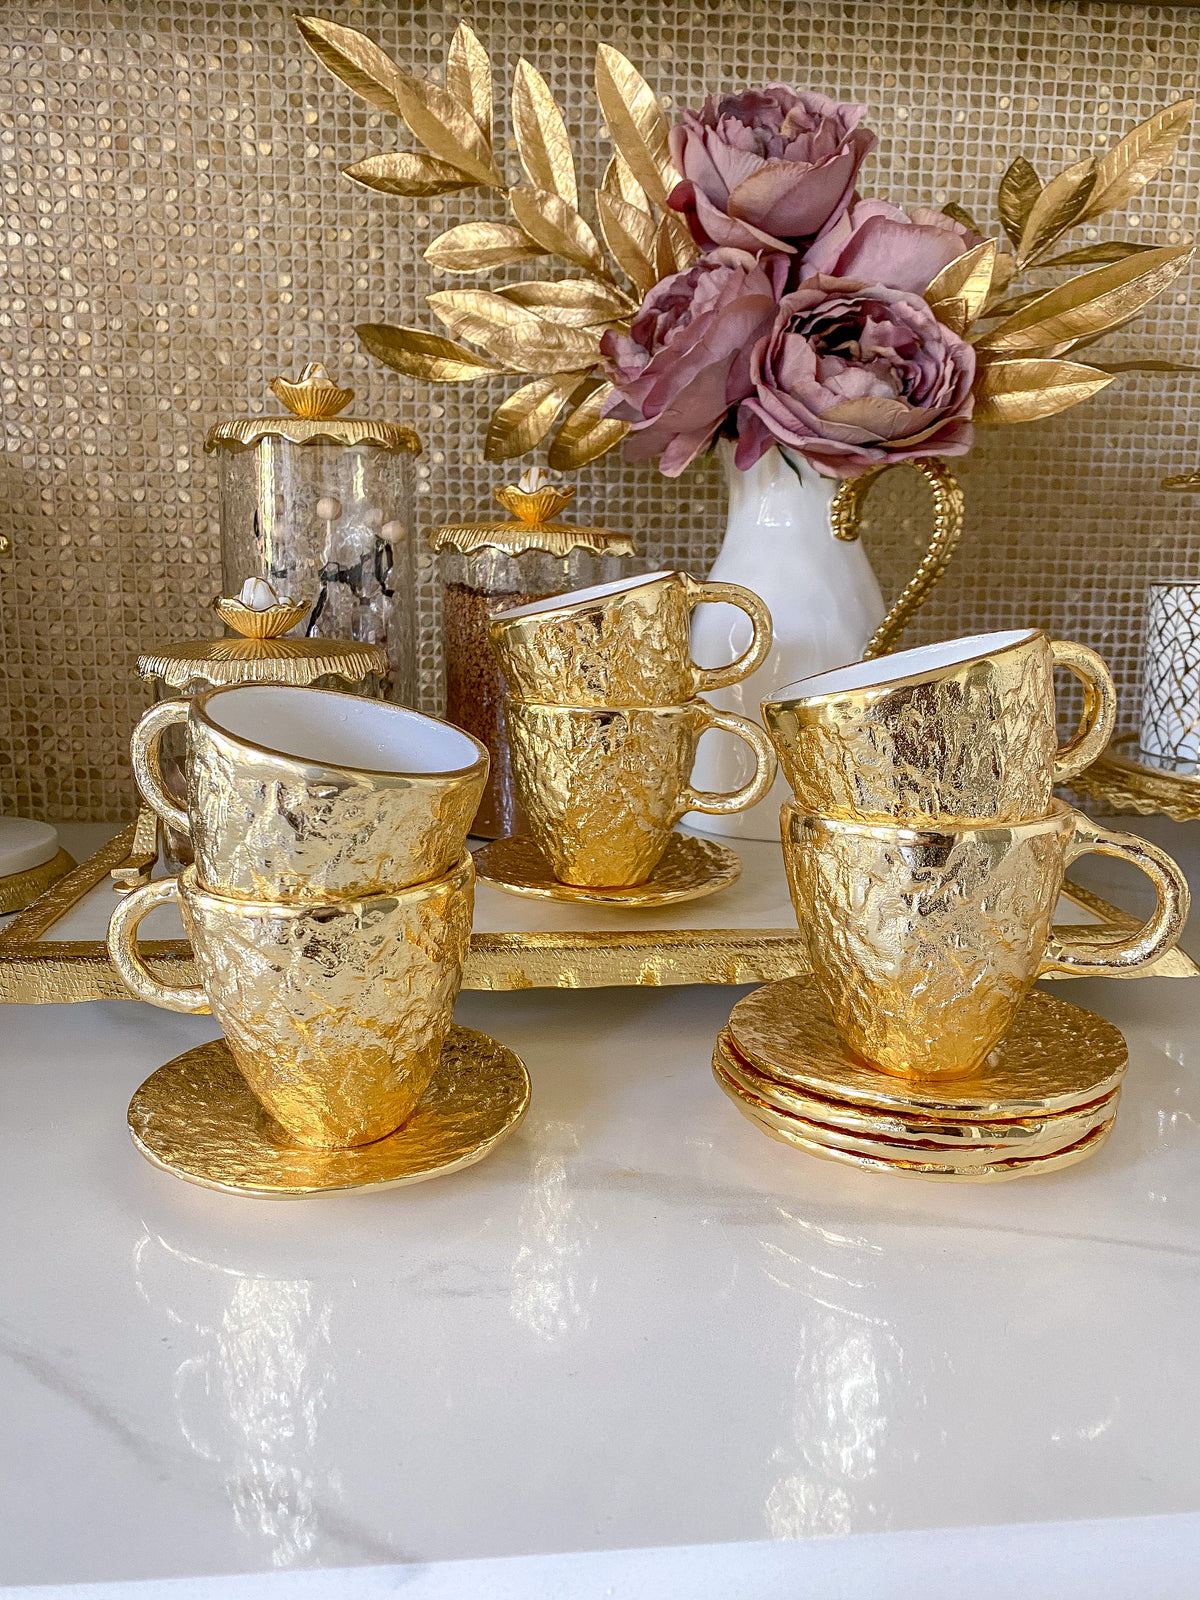 https://www.shopinspiremehomedecor.shop/wp-content/uploads/1693/26/gold-textured-metal-tea-cup-and-saucer-with-white-interior-inspire-me-home-decor-explore-a-world-of-possibilities-take-a-look-at-our-extensive-selection_0.jpg